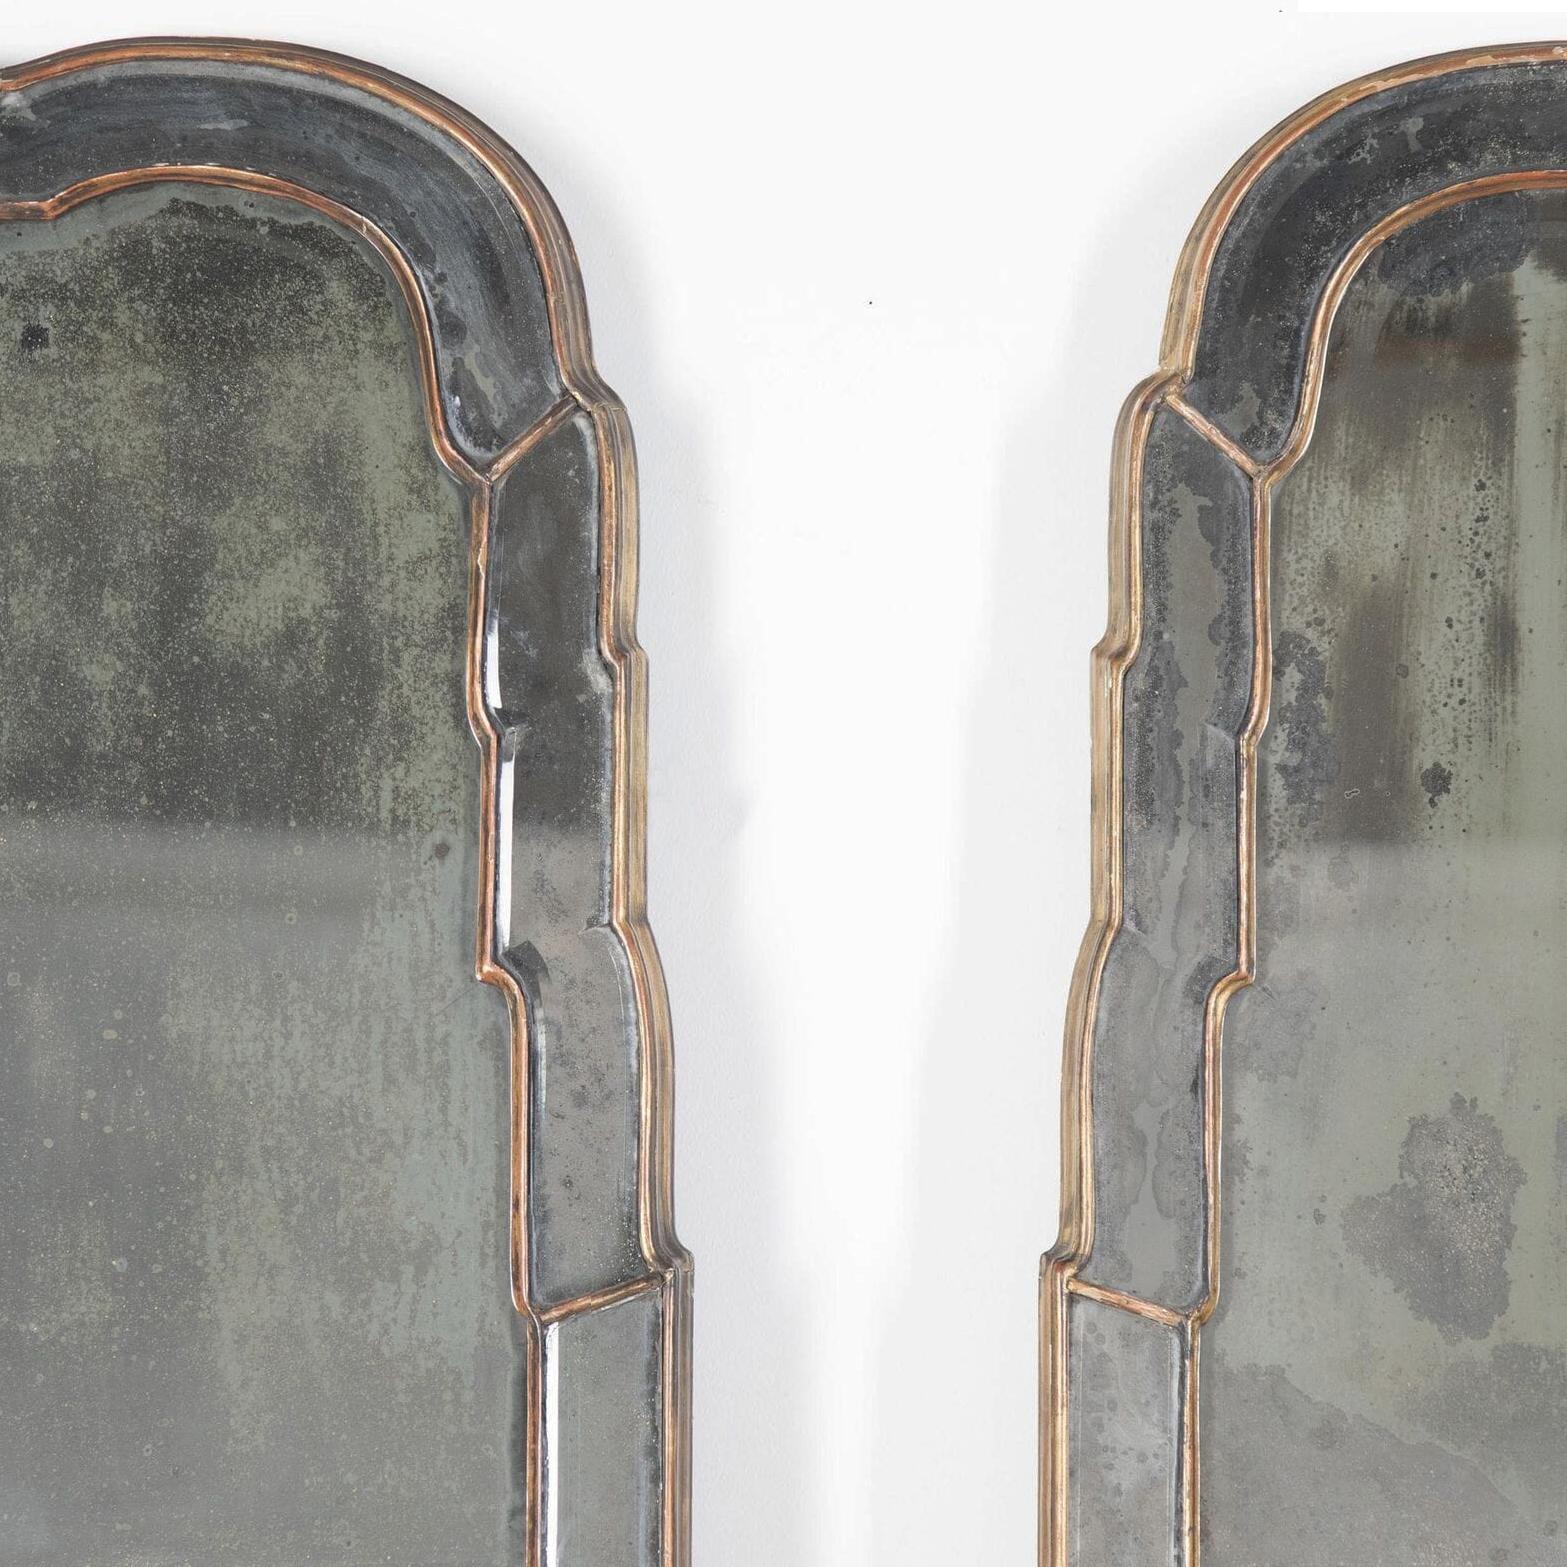 19th century magnificent large pair of Queen Anne style pier mirrors with mirrored border outer slips that are double bevelled that reflect and refracts the light beautifully. 
The double arched divided plates are also hand bevelled and wonderfully